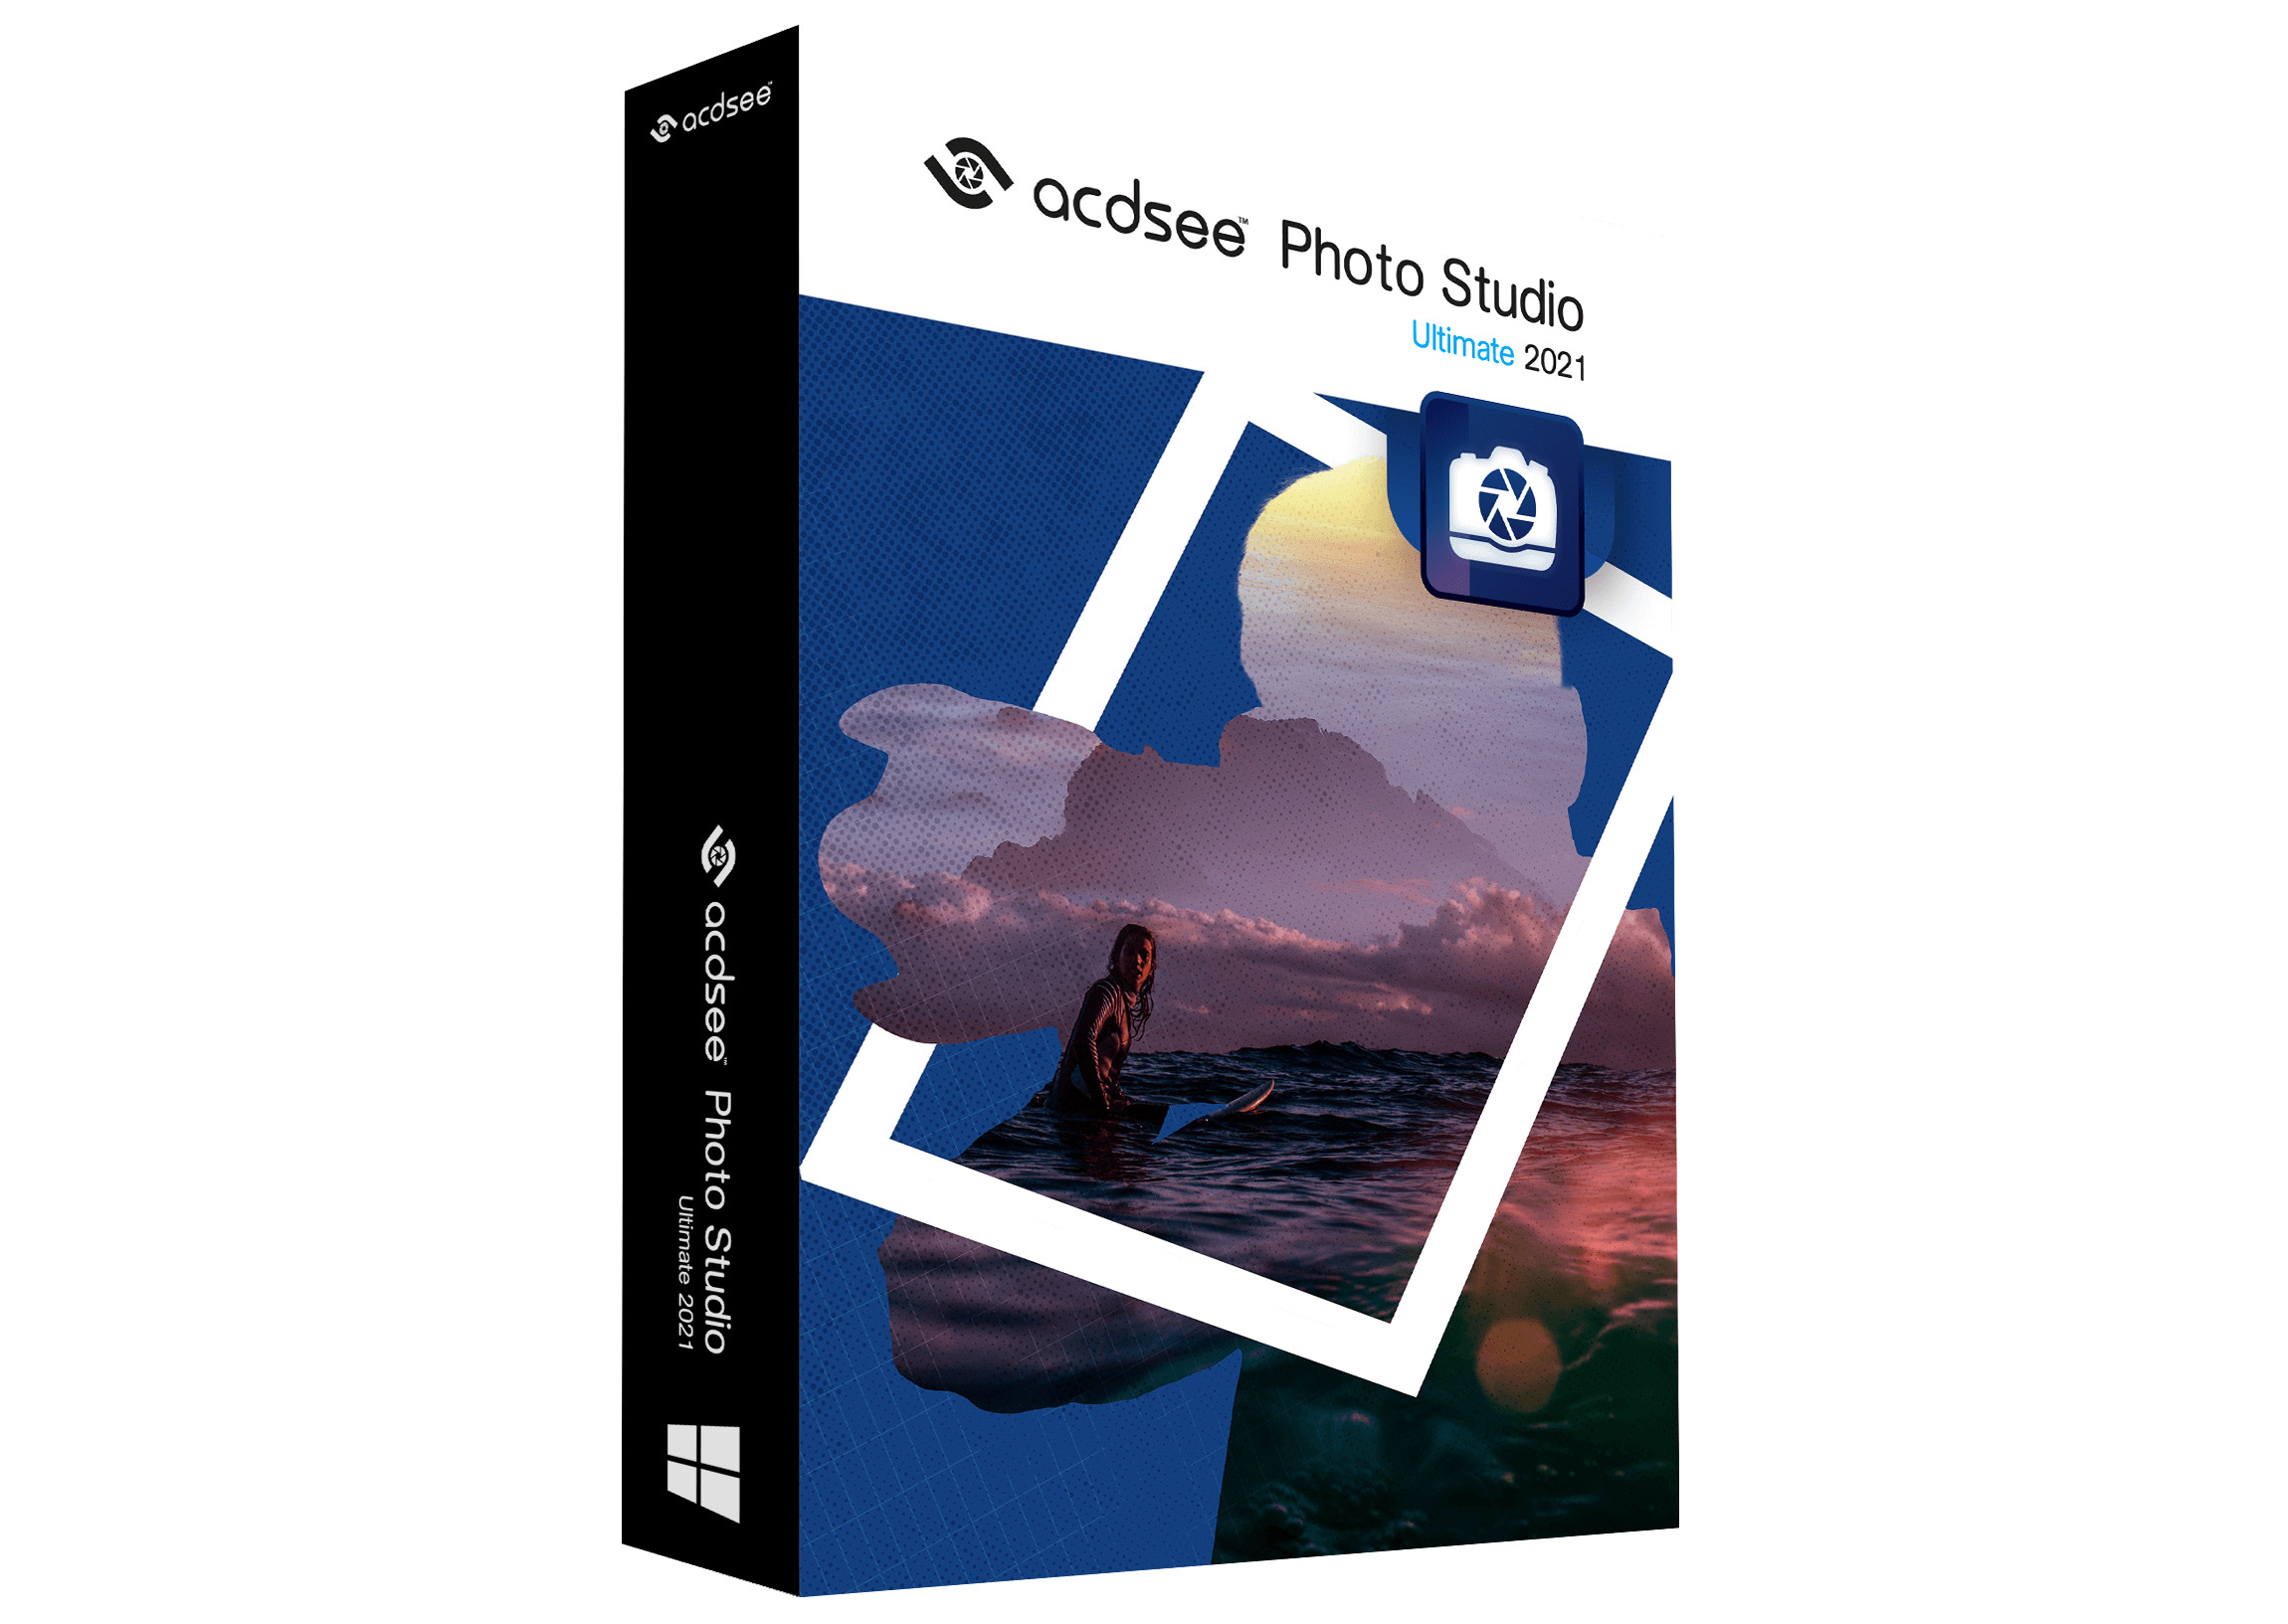 ACDSee Photo Studio Ultimate 2021 Key (6 Months / 1 PC), 11.29$